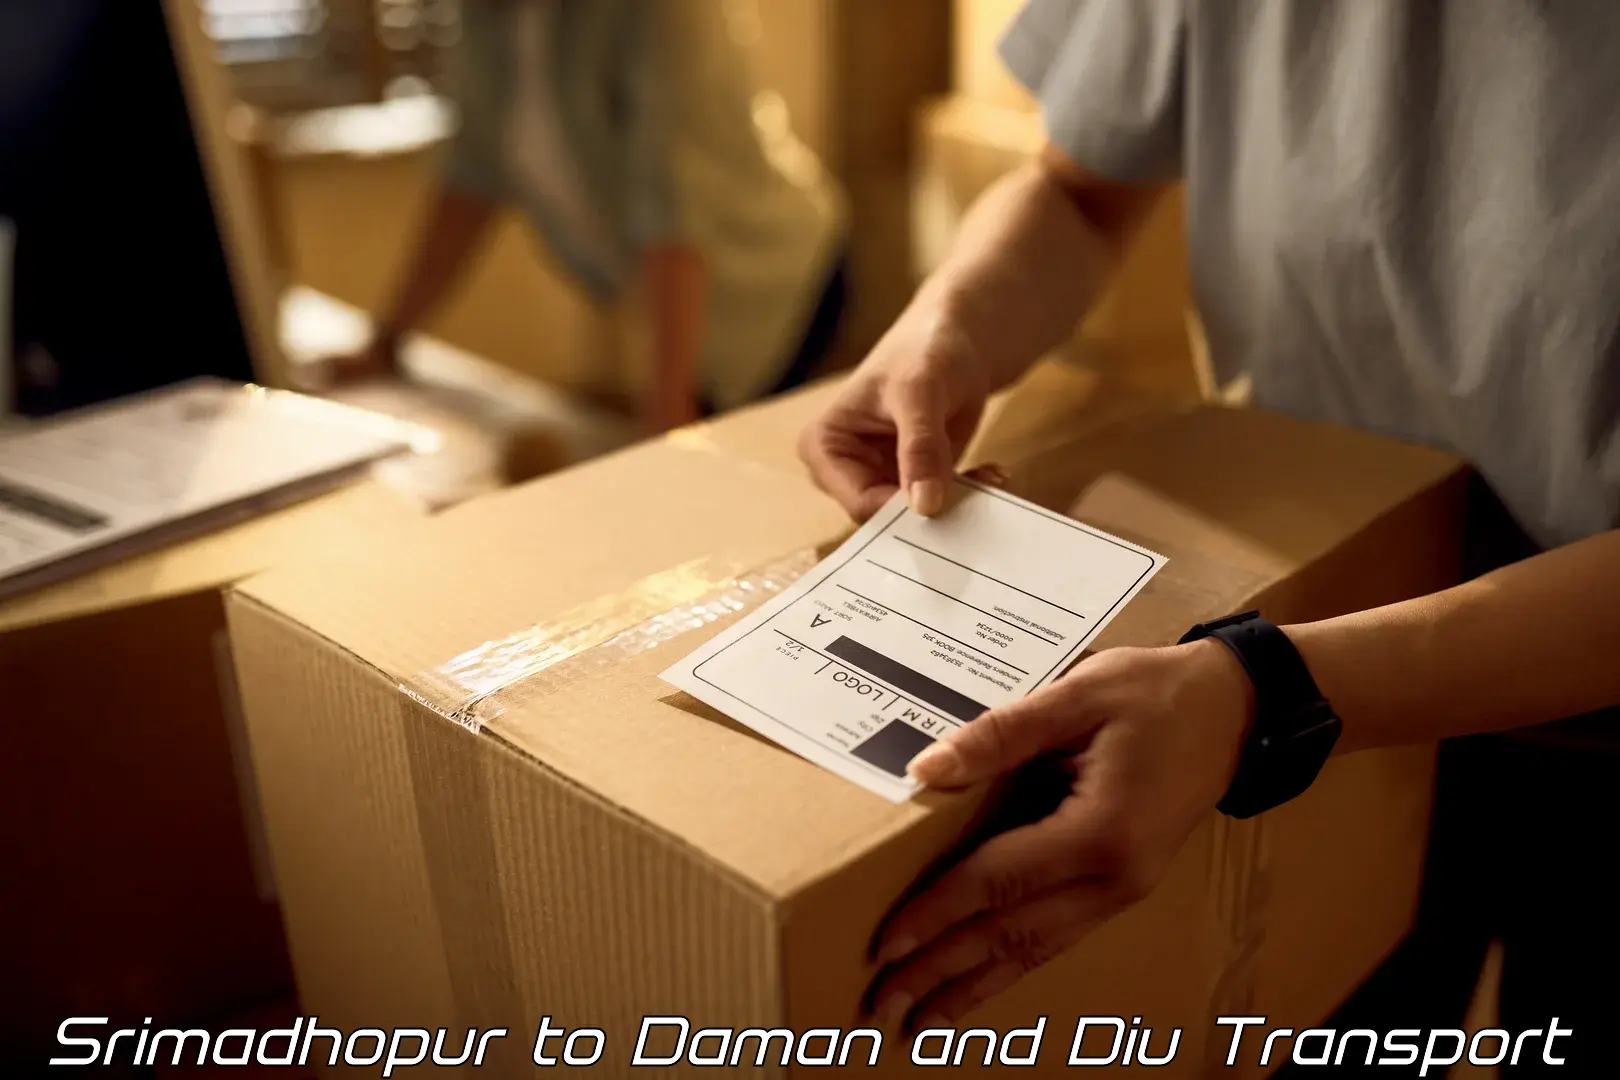 Container transport service Srimadhopur to Daman and Diu